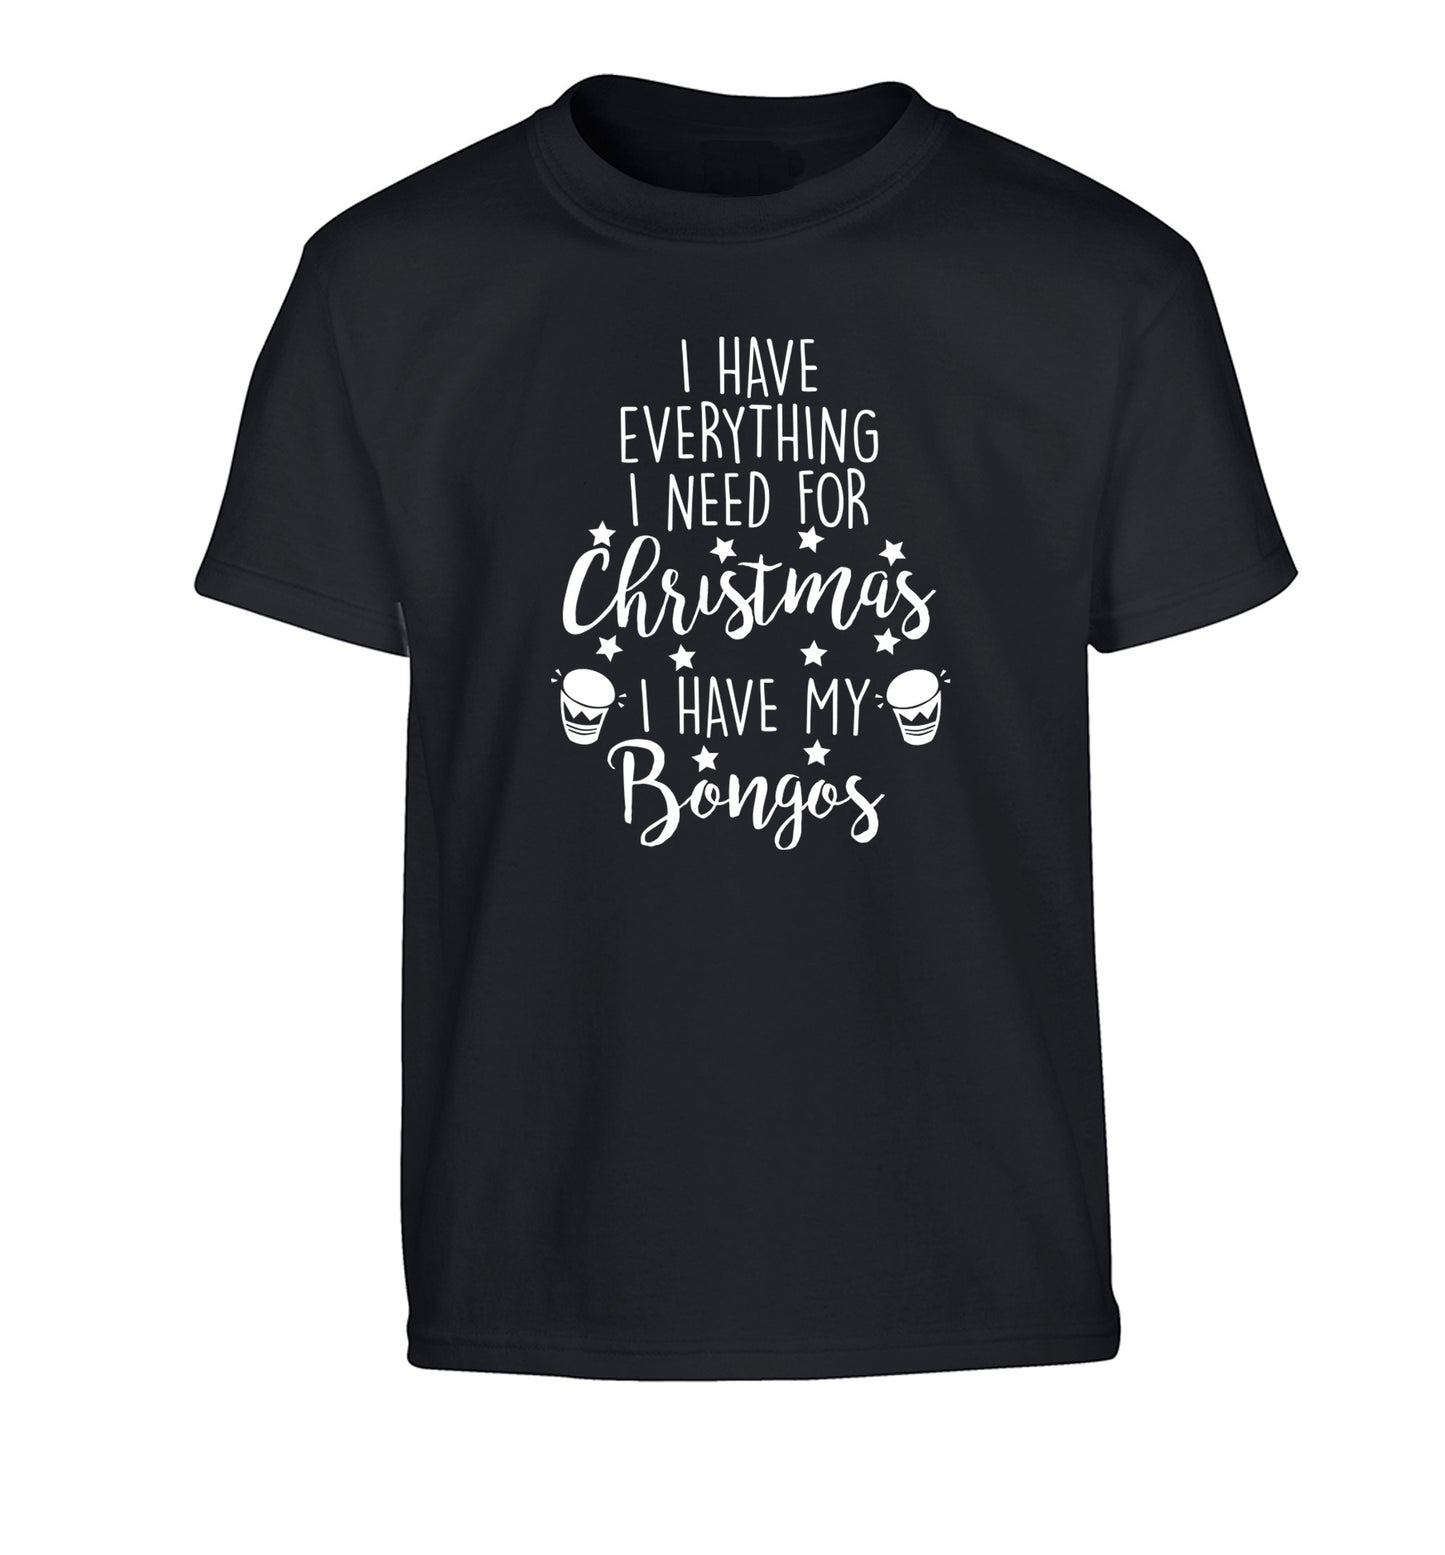 I have everything I need for Christmas I have my bongos! Children's black Tshirt 12-14 Years